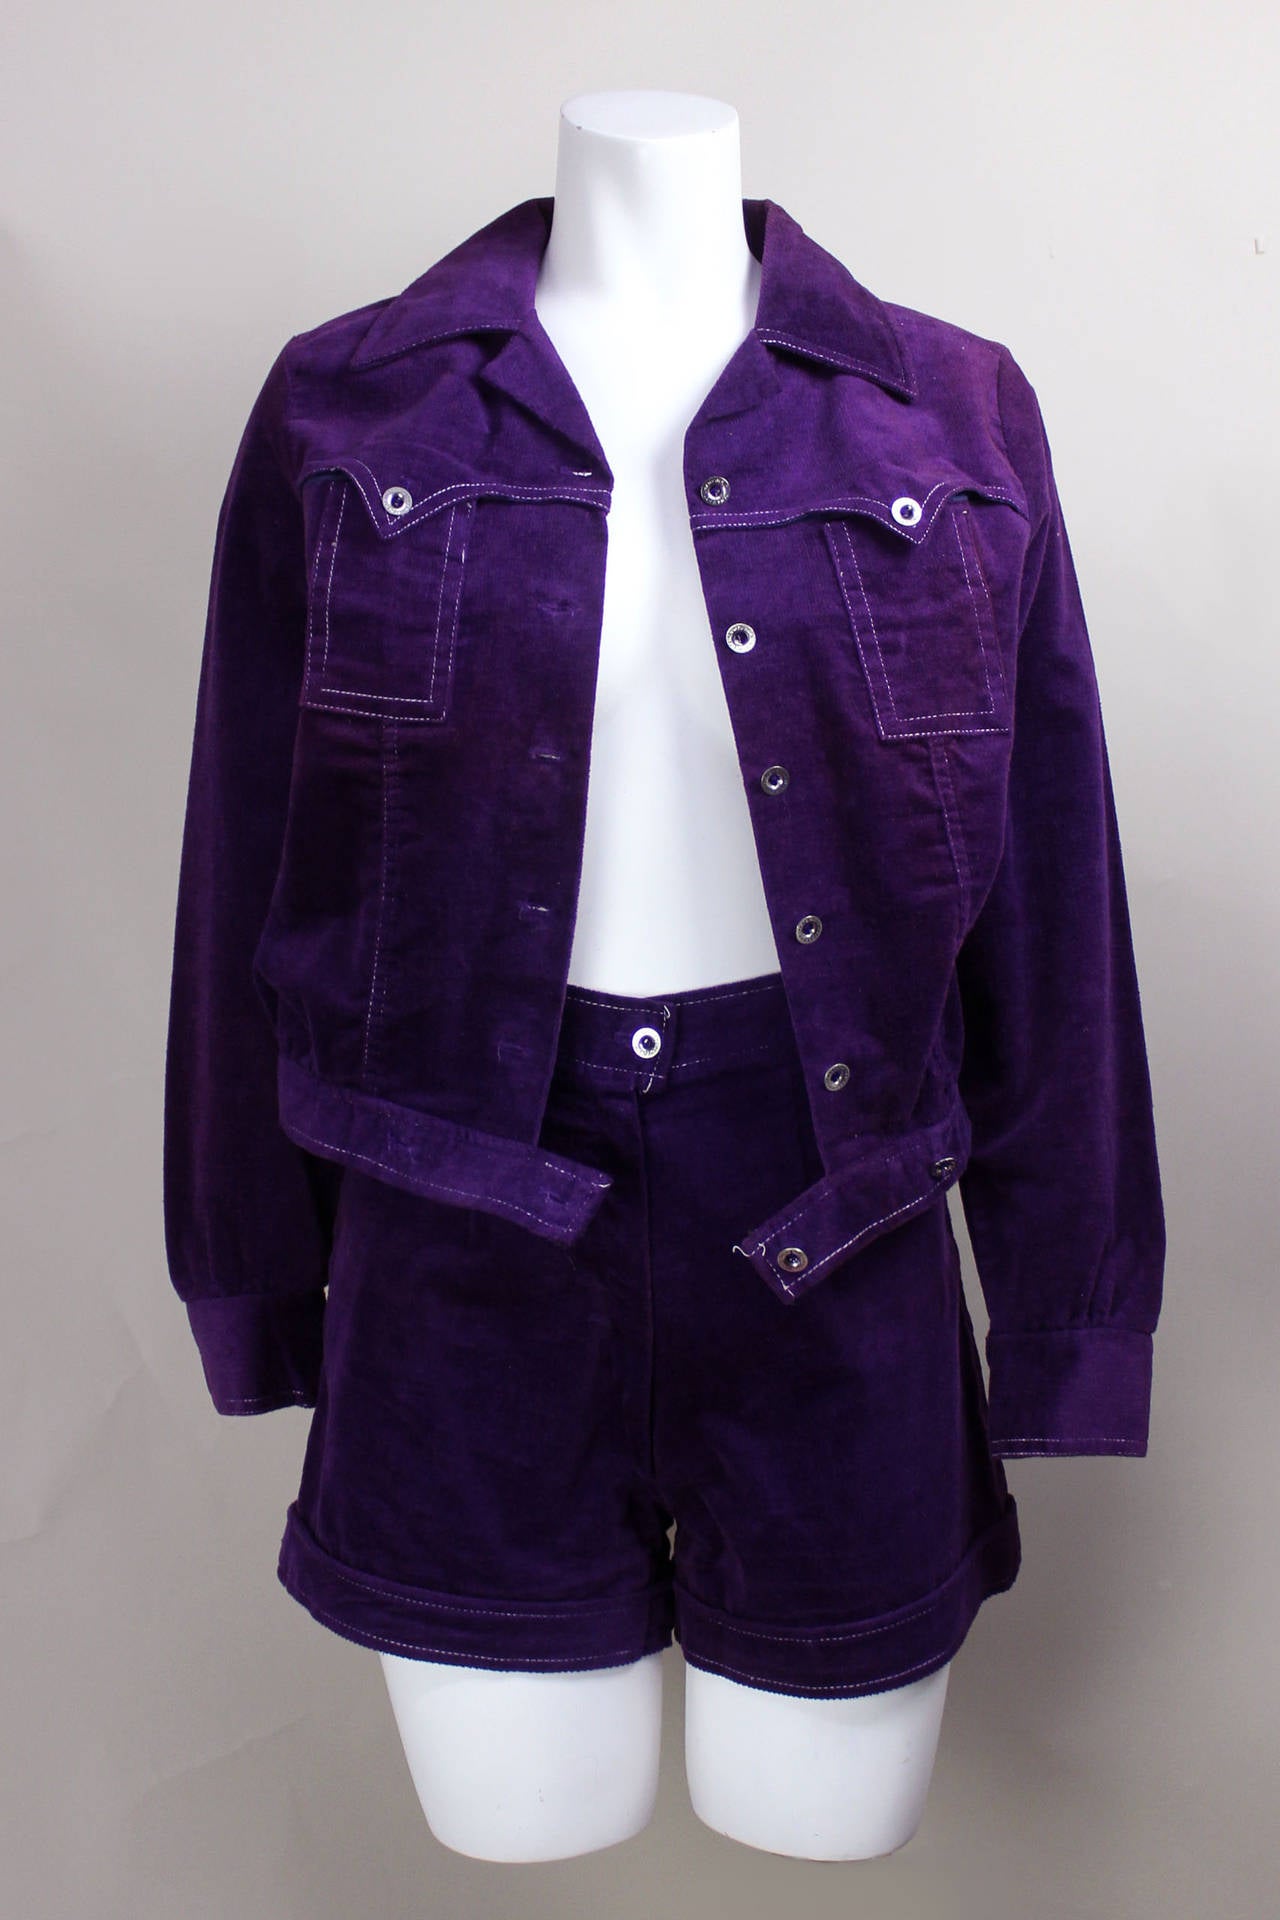 This hot pant and matching cropped jacket are cut from a soft and rich purple velveteen corduroy. The shorts are high waisted with a perfect little 1.5” cuff. The jacket is an incarnation of a classic denim jacket, with two breast pockets and